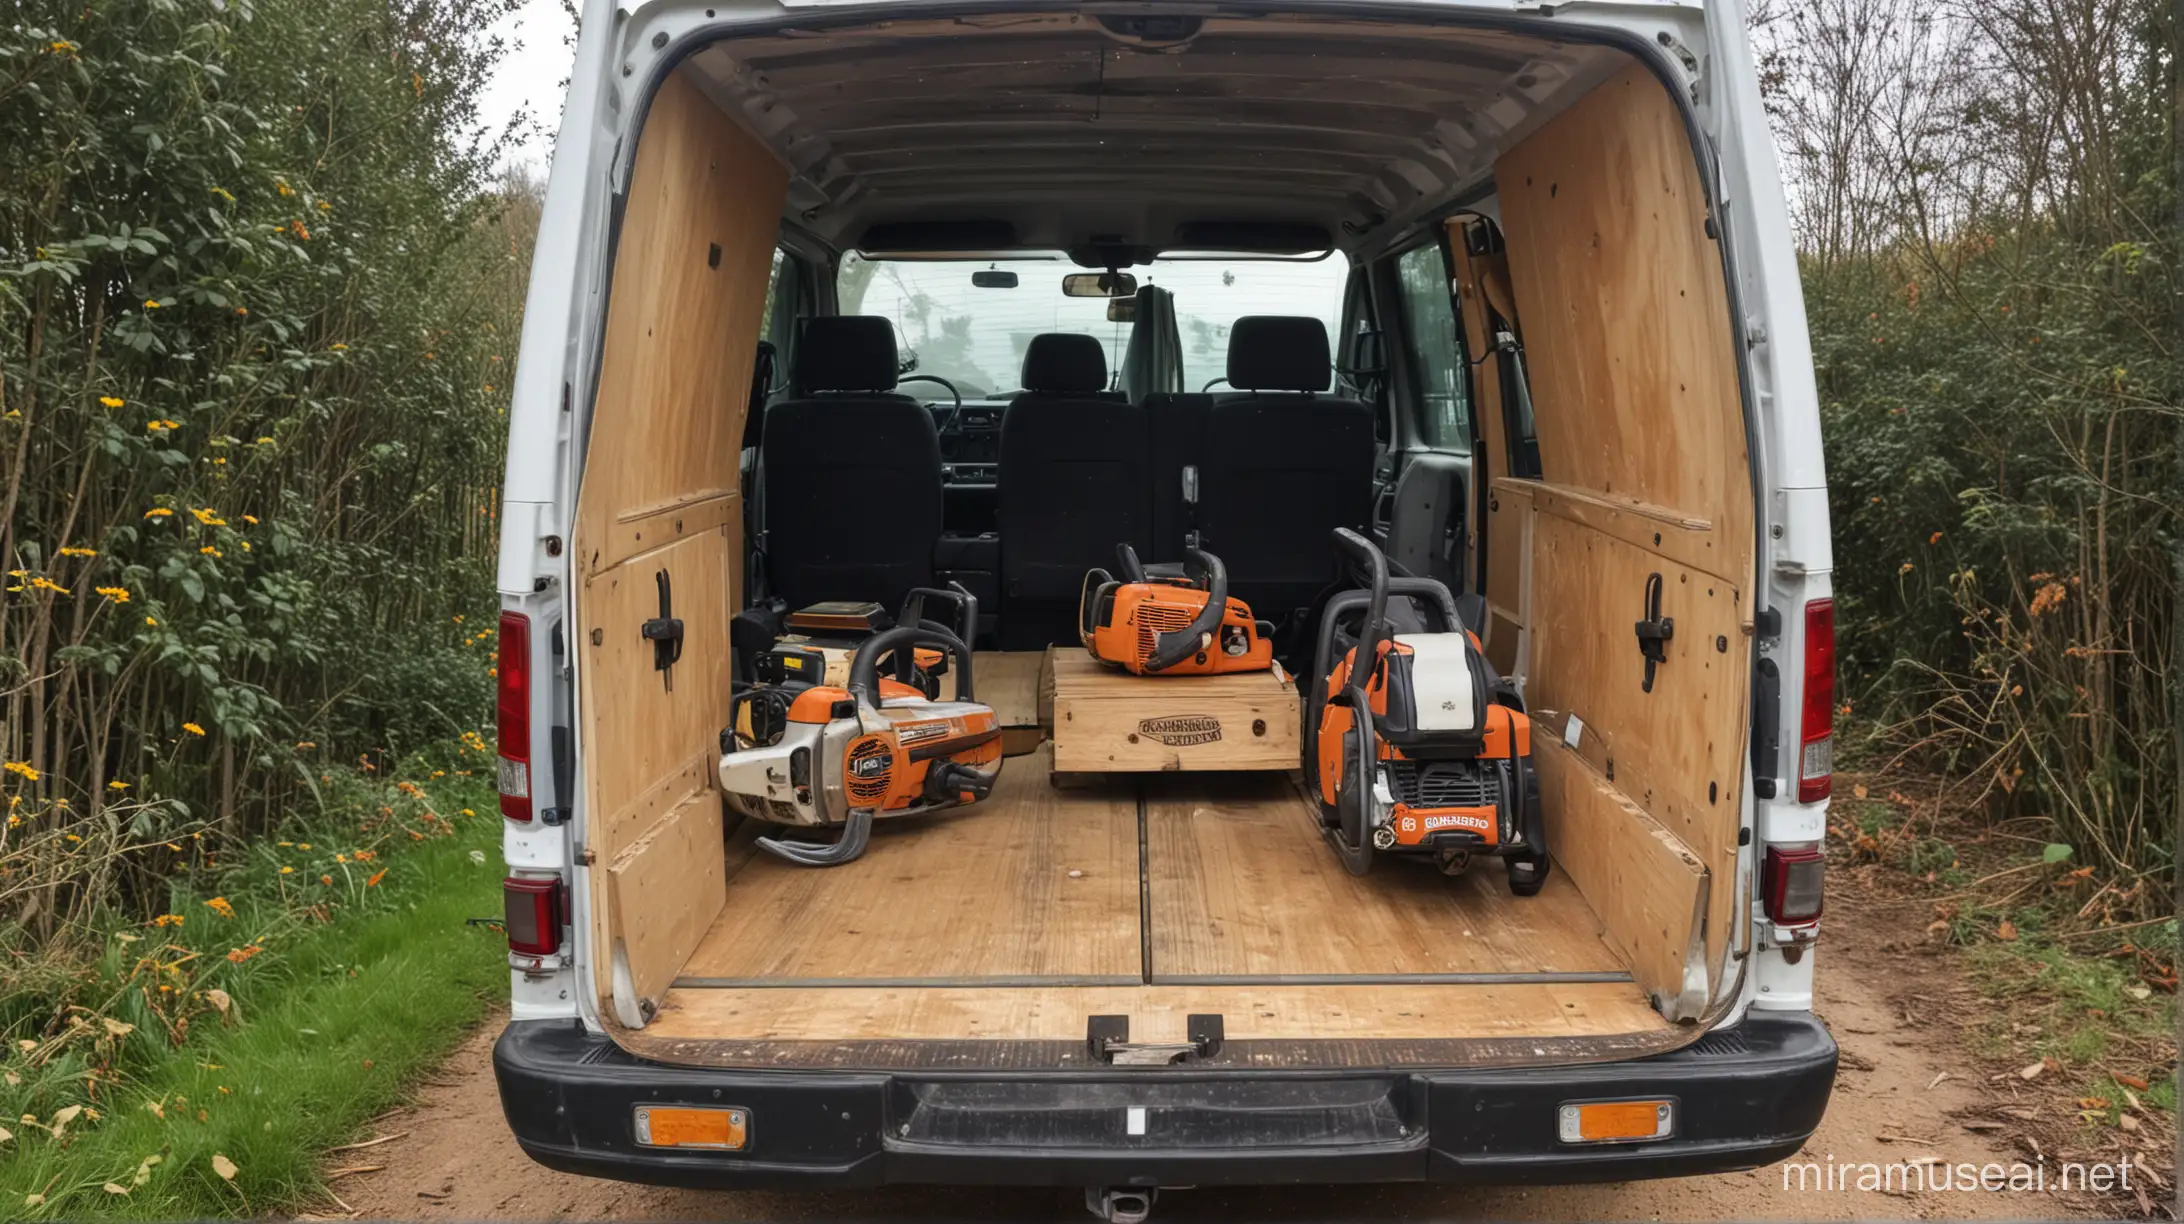 Two lumperjacks, one with a chainsaw, sitting face to face in the back of van, seen from the back with both doors wide open.